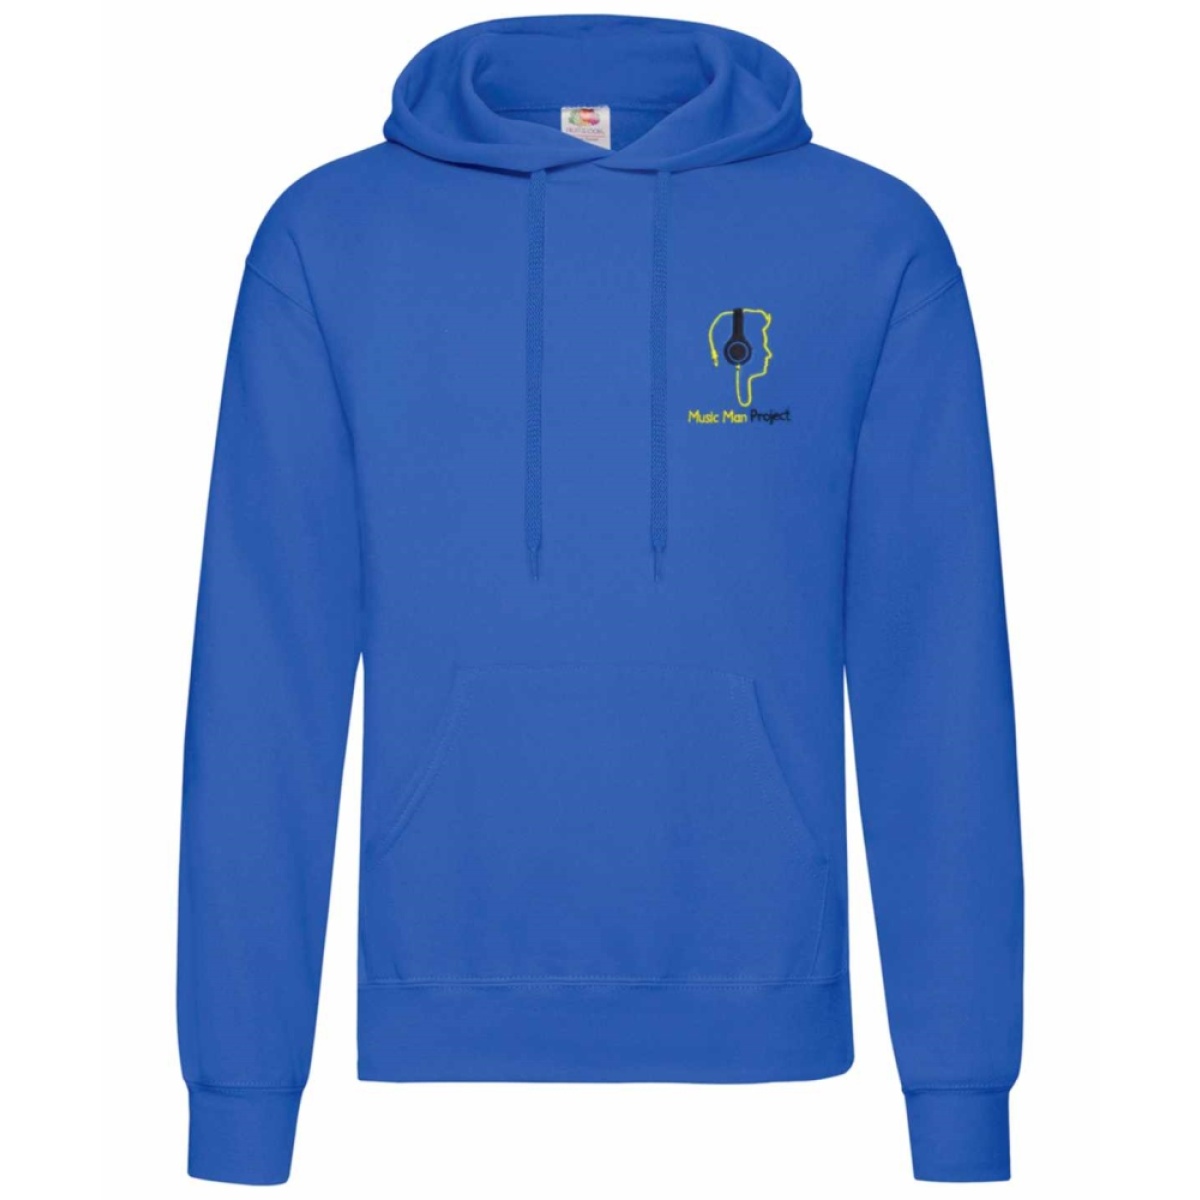 Music Man Project - Essex - Essex Hoodie, The Music Man Project